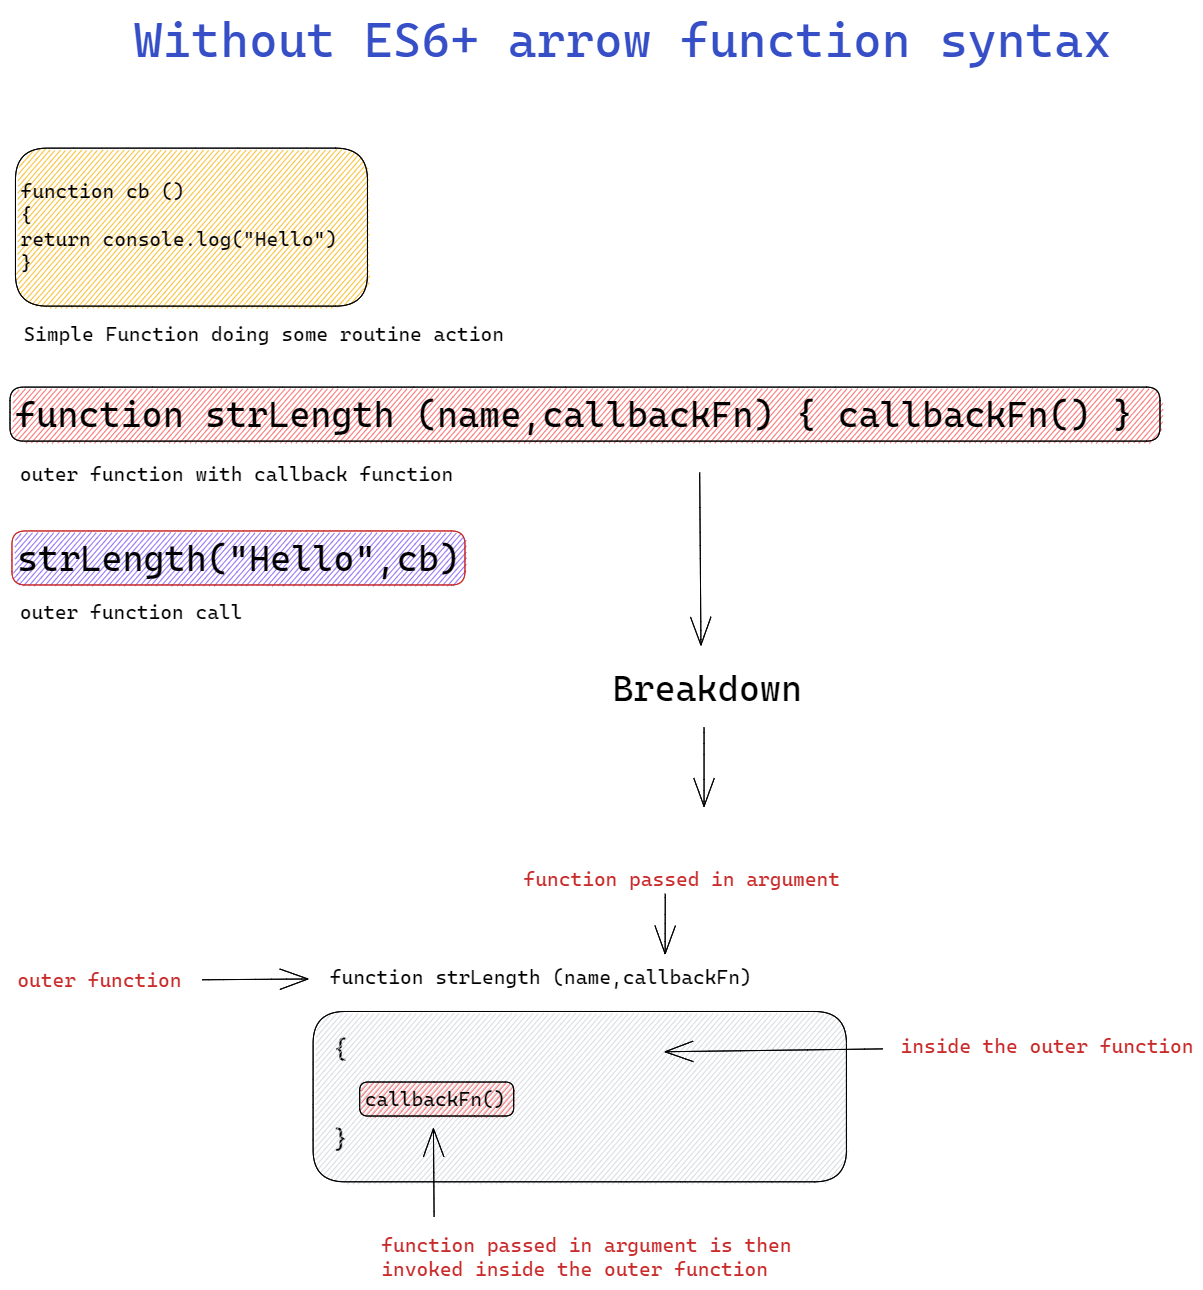 A diagram showing how callback functions are written without ES6+ syntax